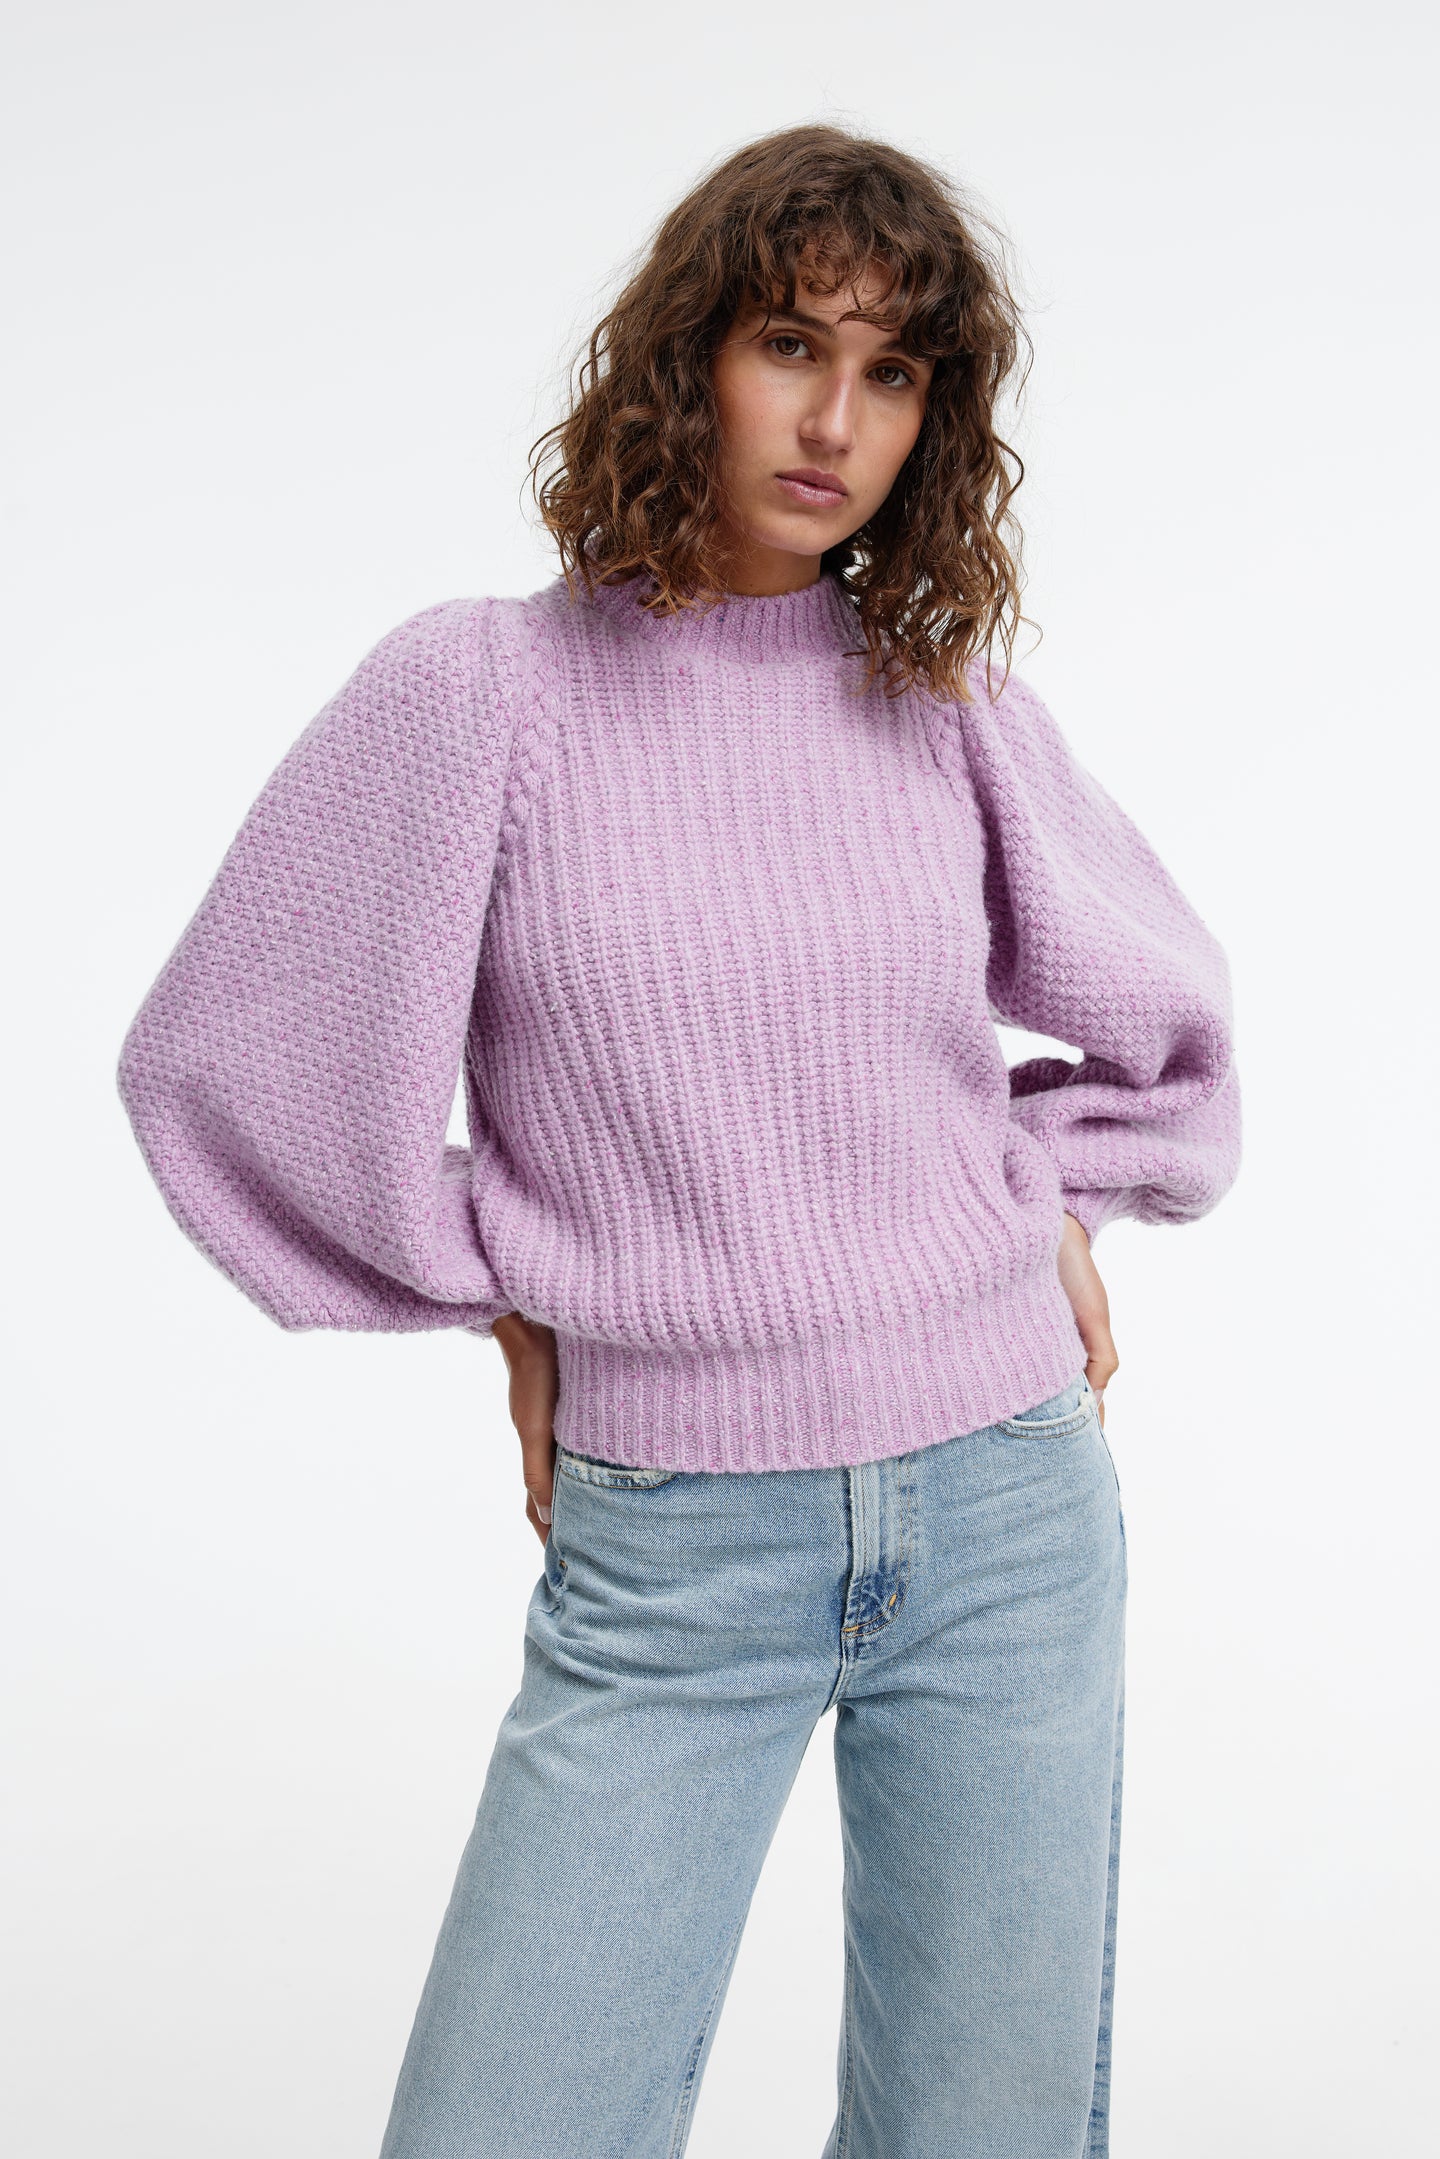 Blair Knit Orchid